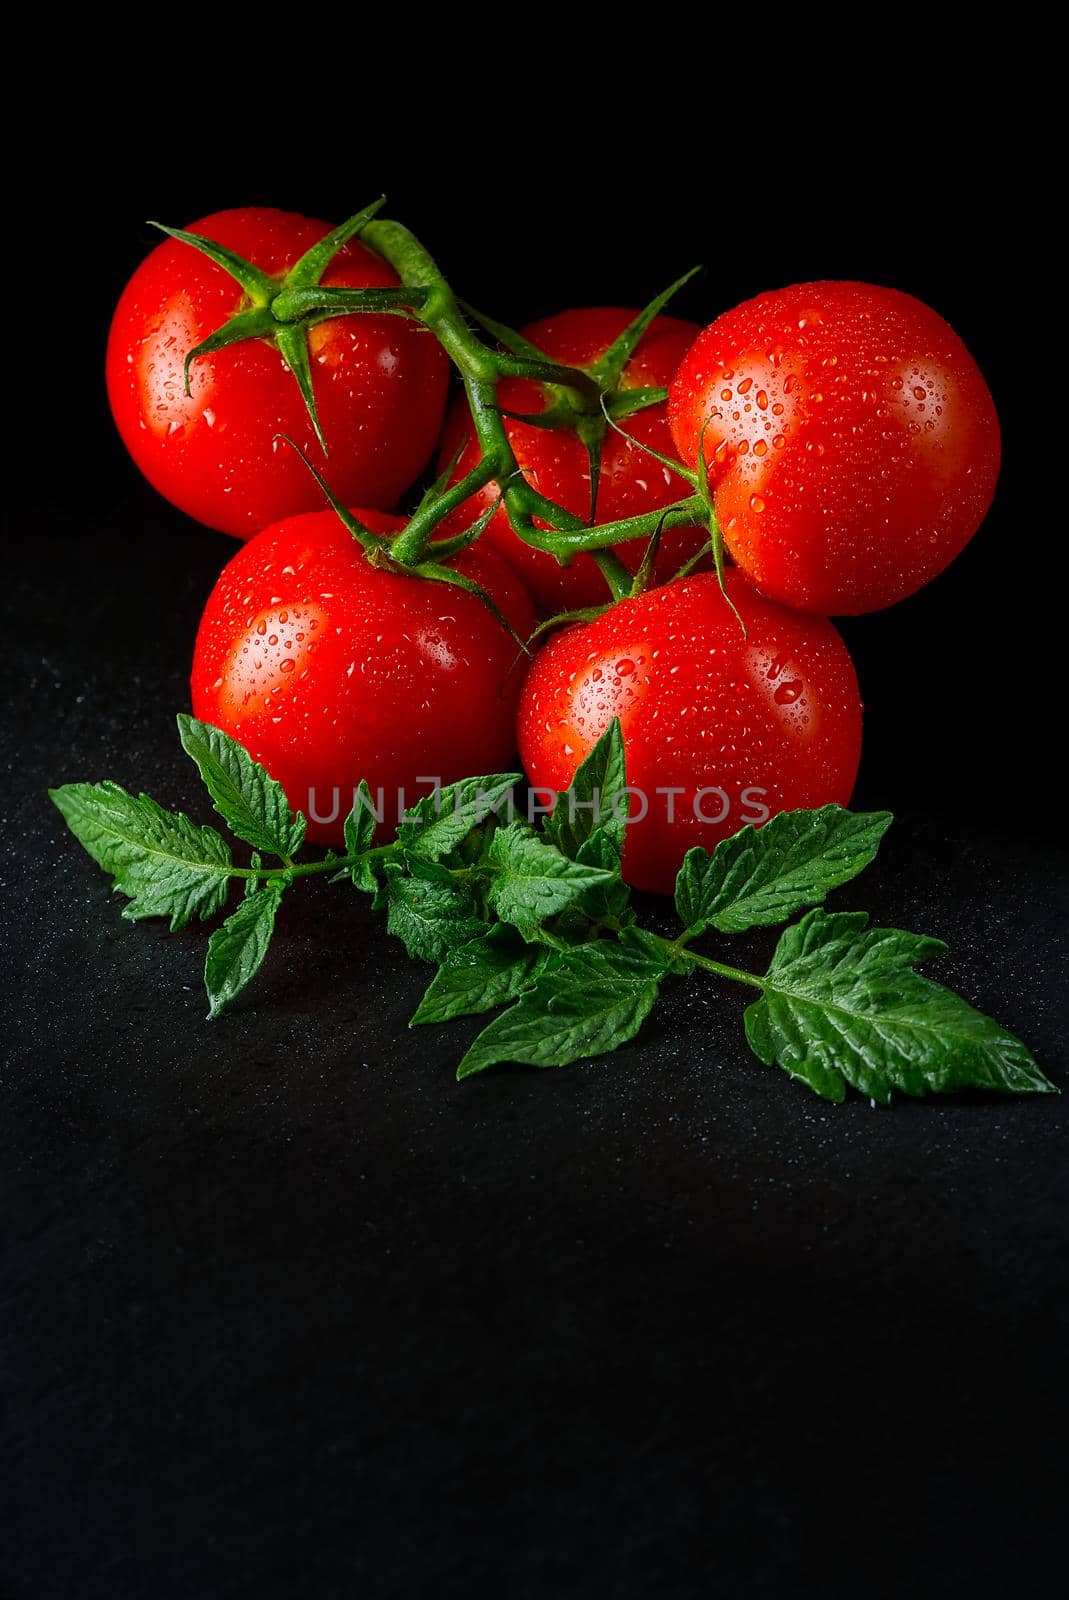 Organic tomatoes on the black table in low key, with water drops